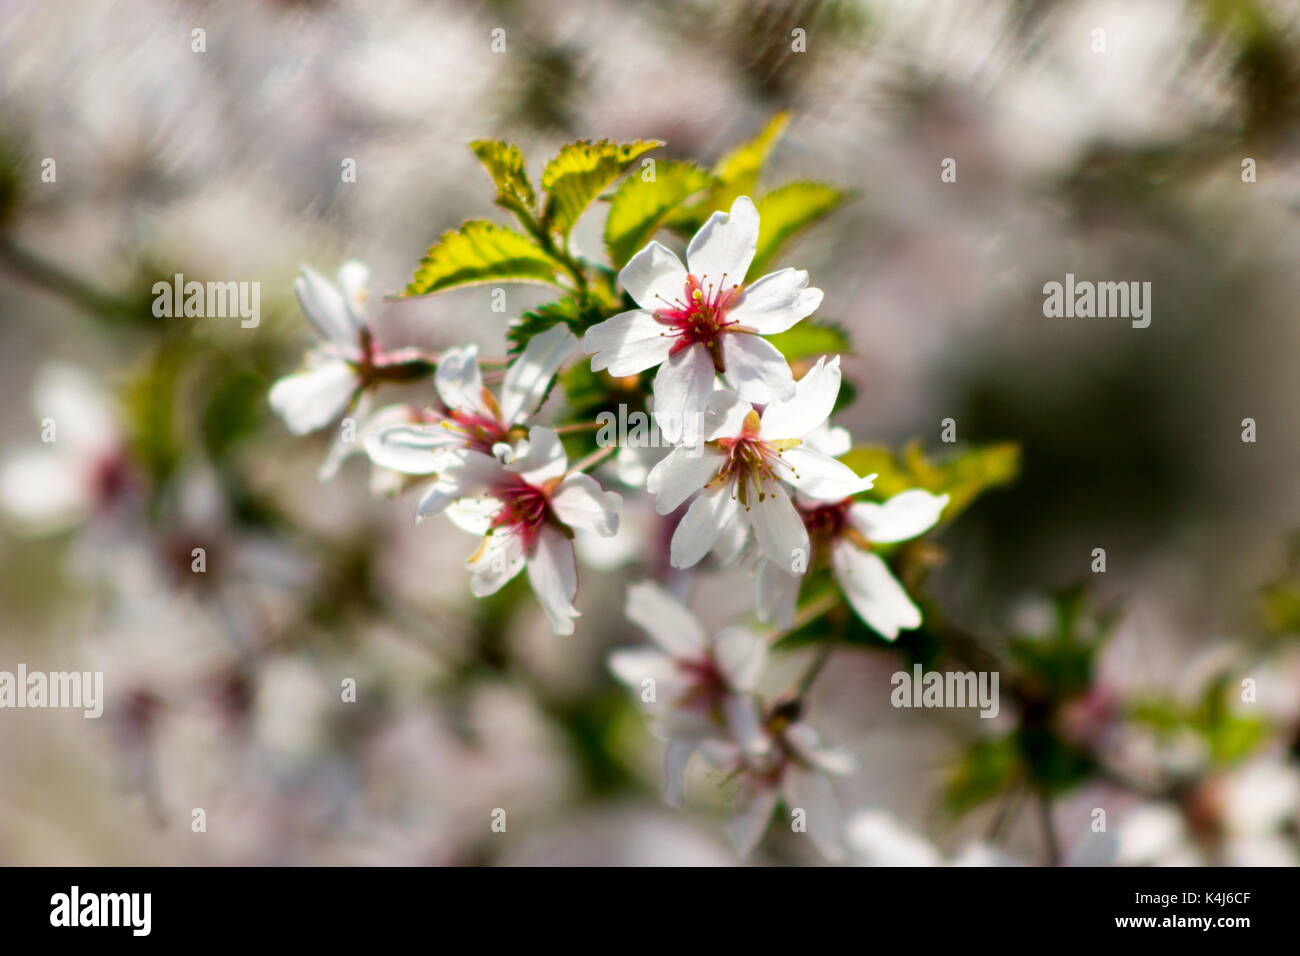 One blooming branch of sakura at blurred green and white background Stock Photo